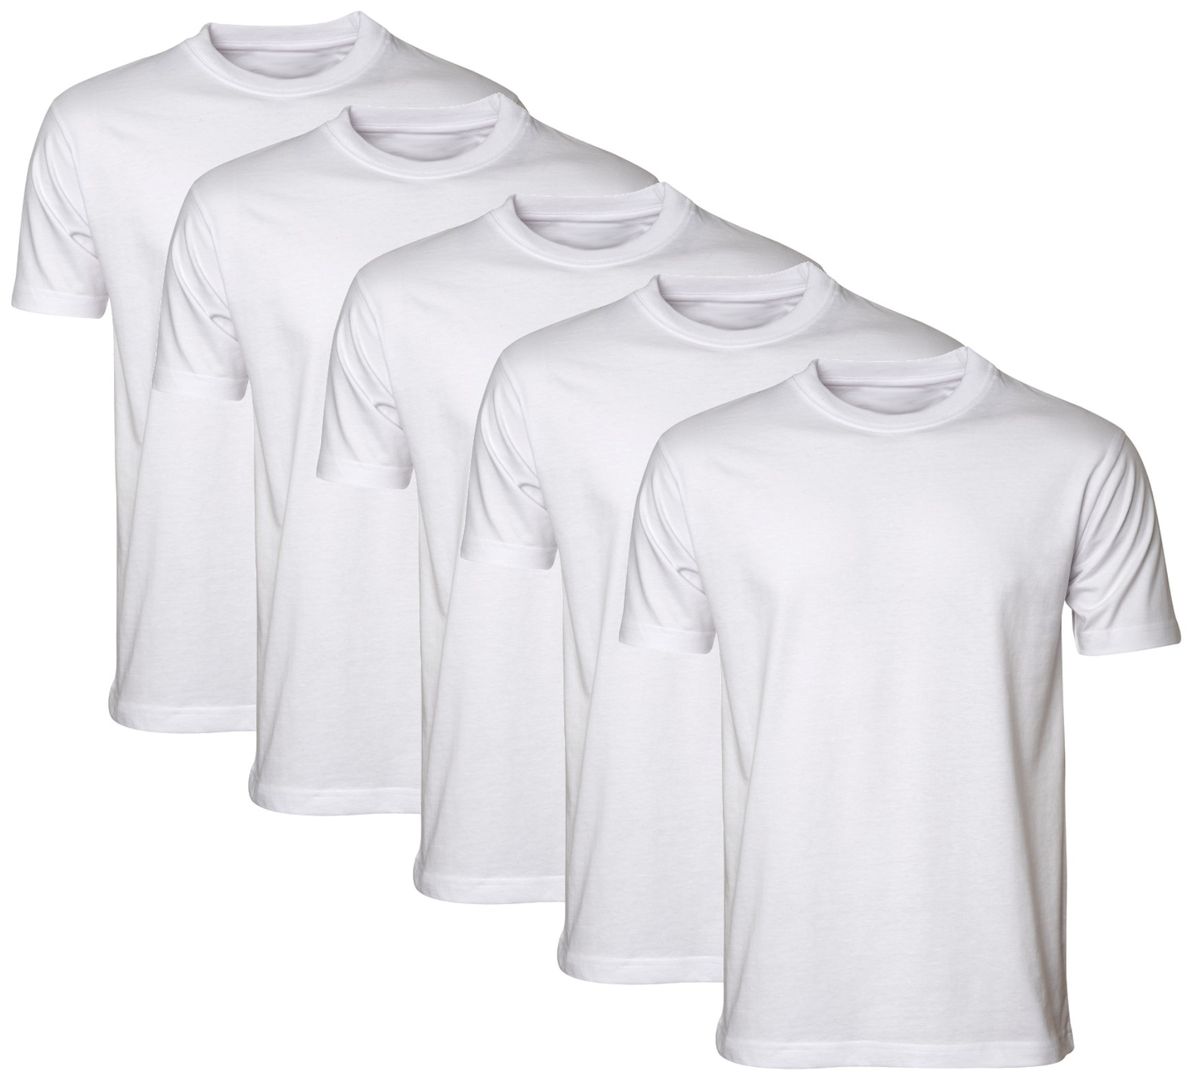 PepperST Unisex T-Shirt - White (5 Pack) | Shop Today. Get it Tomorrow ...